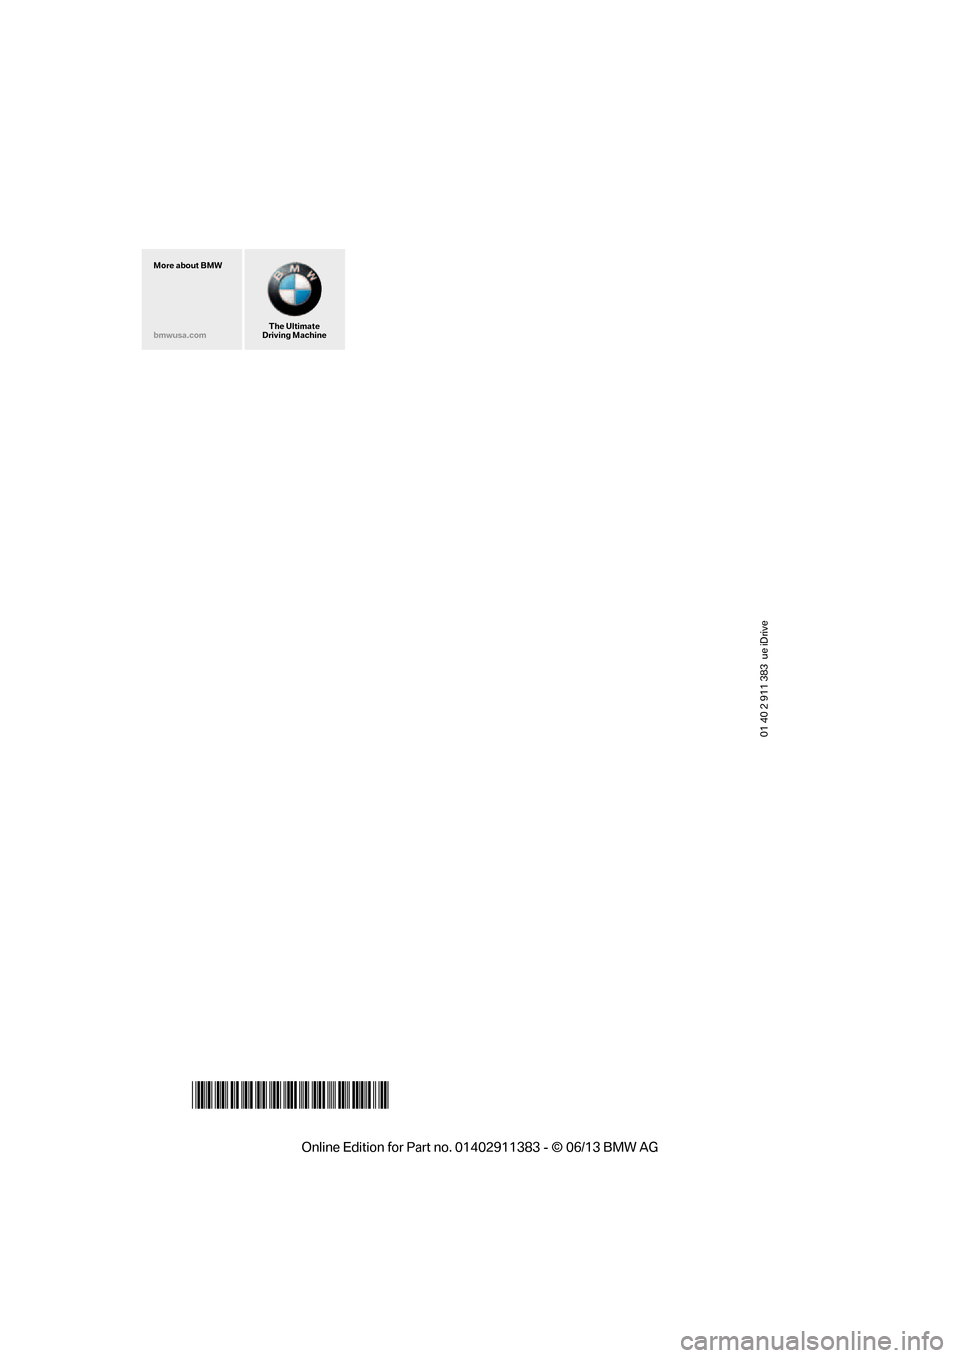 BMW 3 SERIES CONVERTIBLE 2013 E93 Owners Manual 01 40 2 911 383  ue iDrive
*BL291138300R*
The Ultimate
Driving Machine
More about BMW
bmwusa.com

00320051004F004C00510048000300280047004C0057004C005200510003  